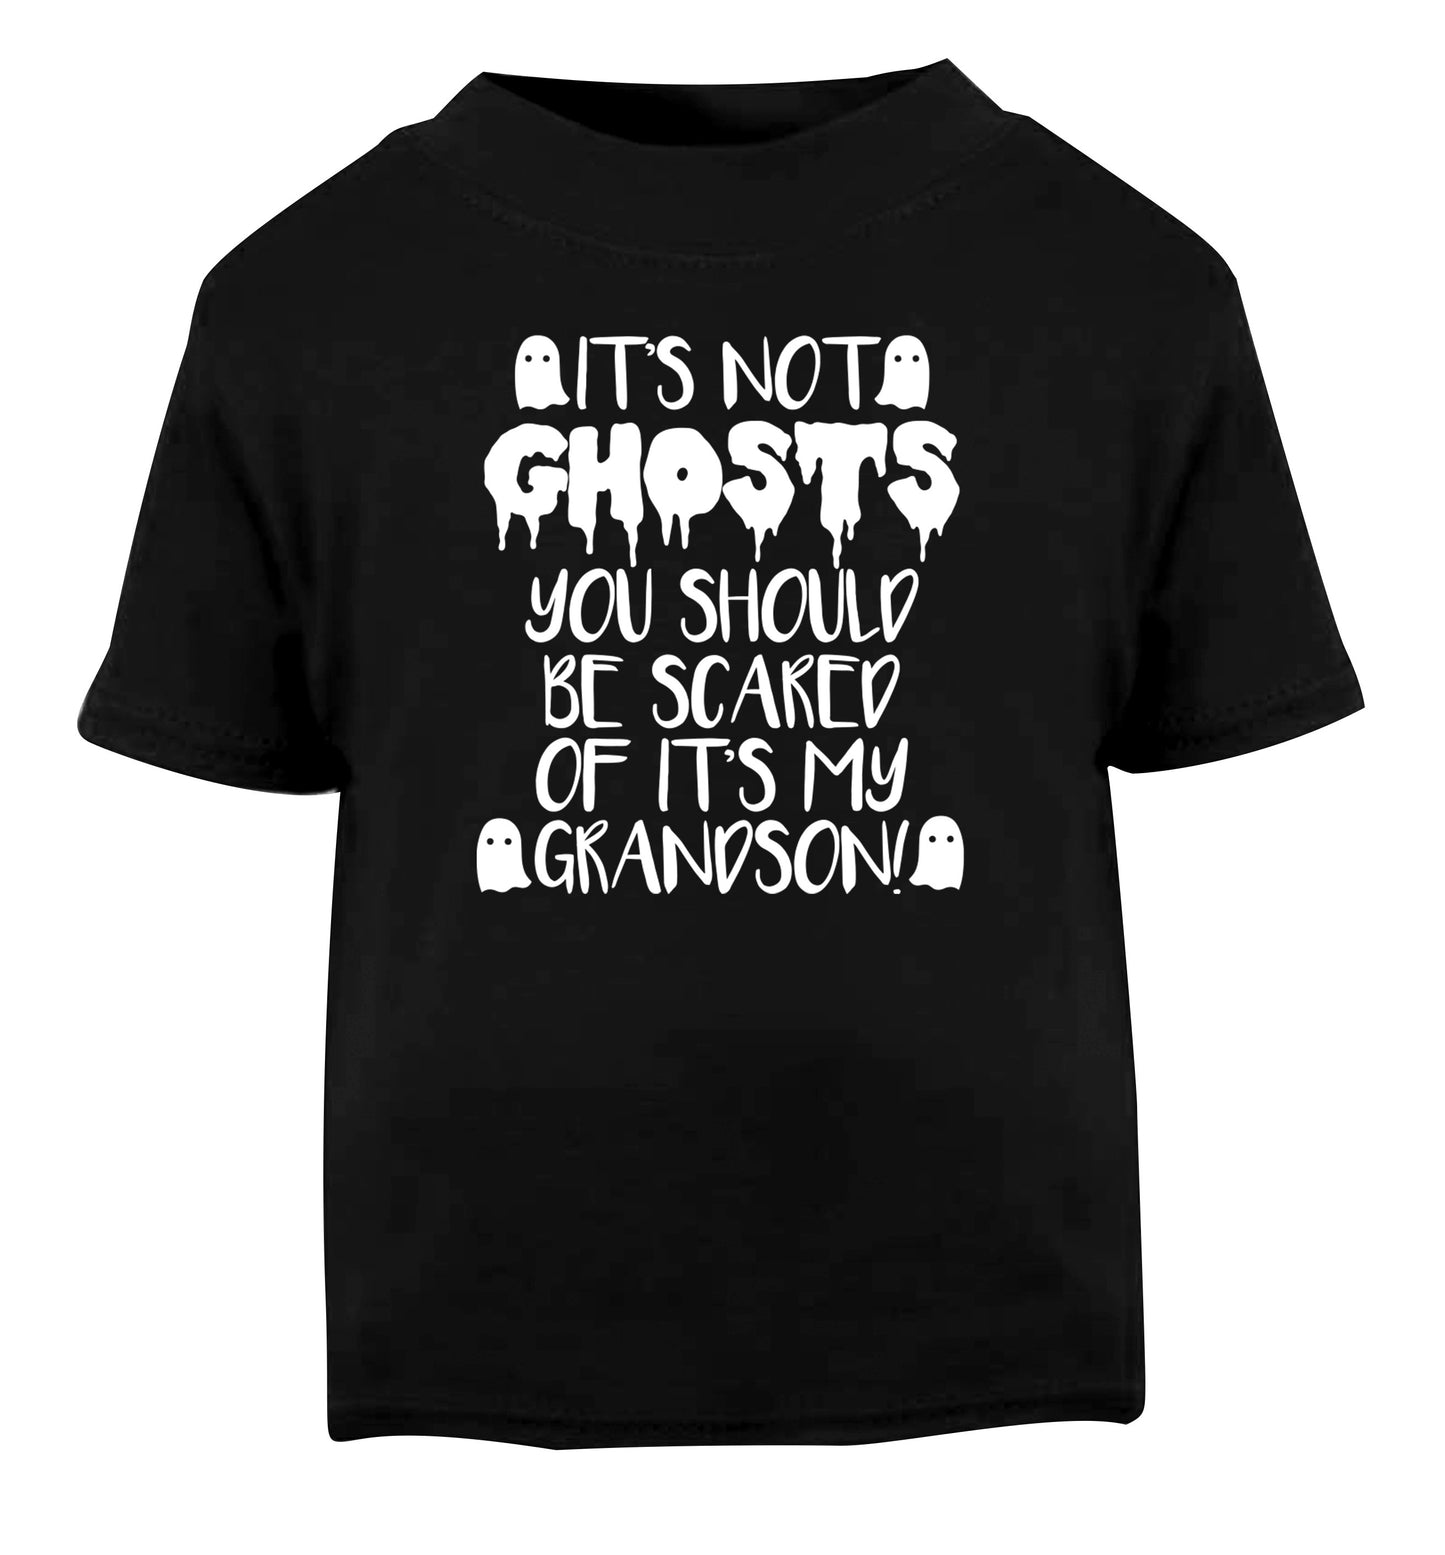 It's not ghosts you should be scared of it's my grandson! Black Baby Toddler Tshirt 2 years